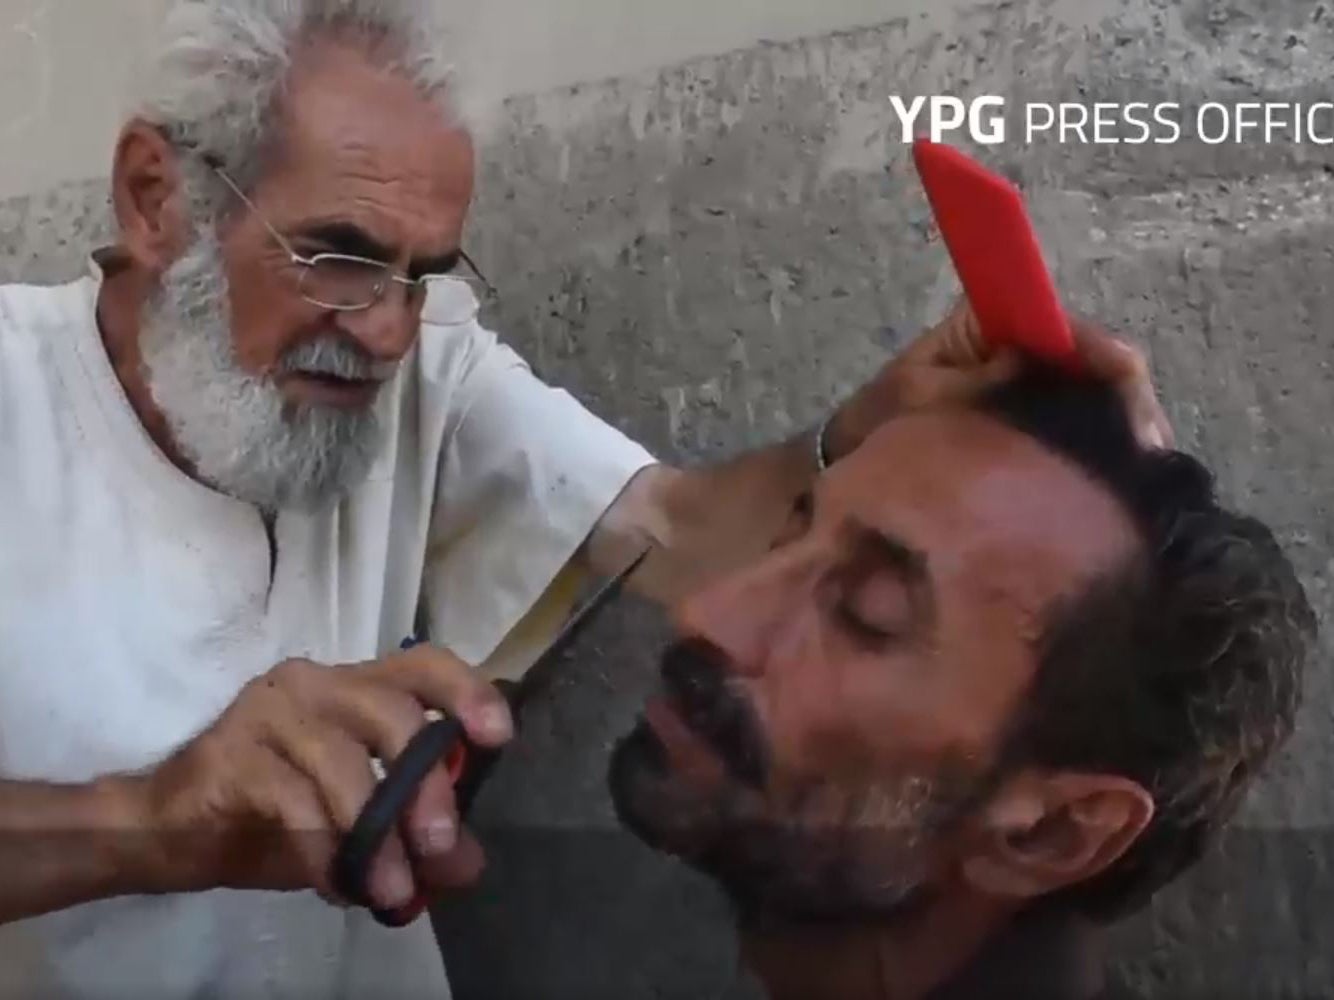 Men have cut off beards they were forced to grow under Isis rule